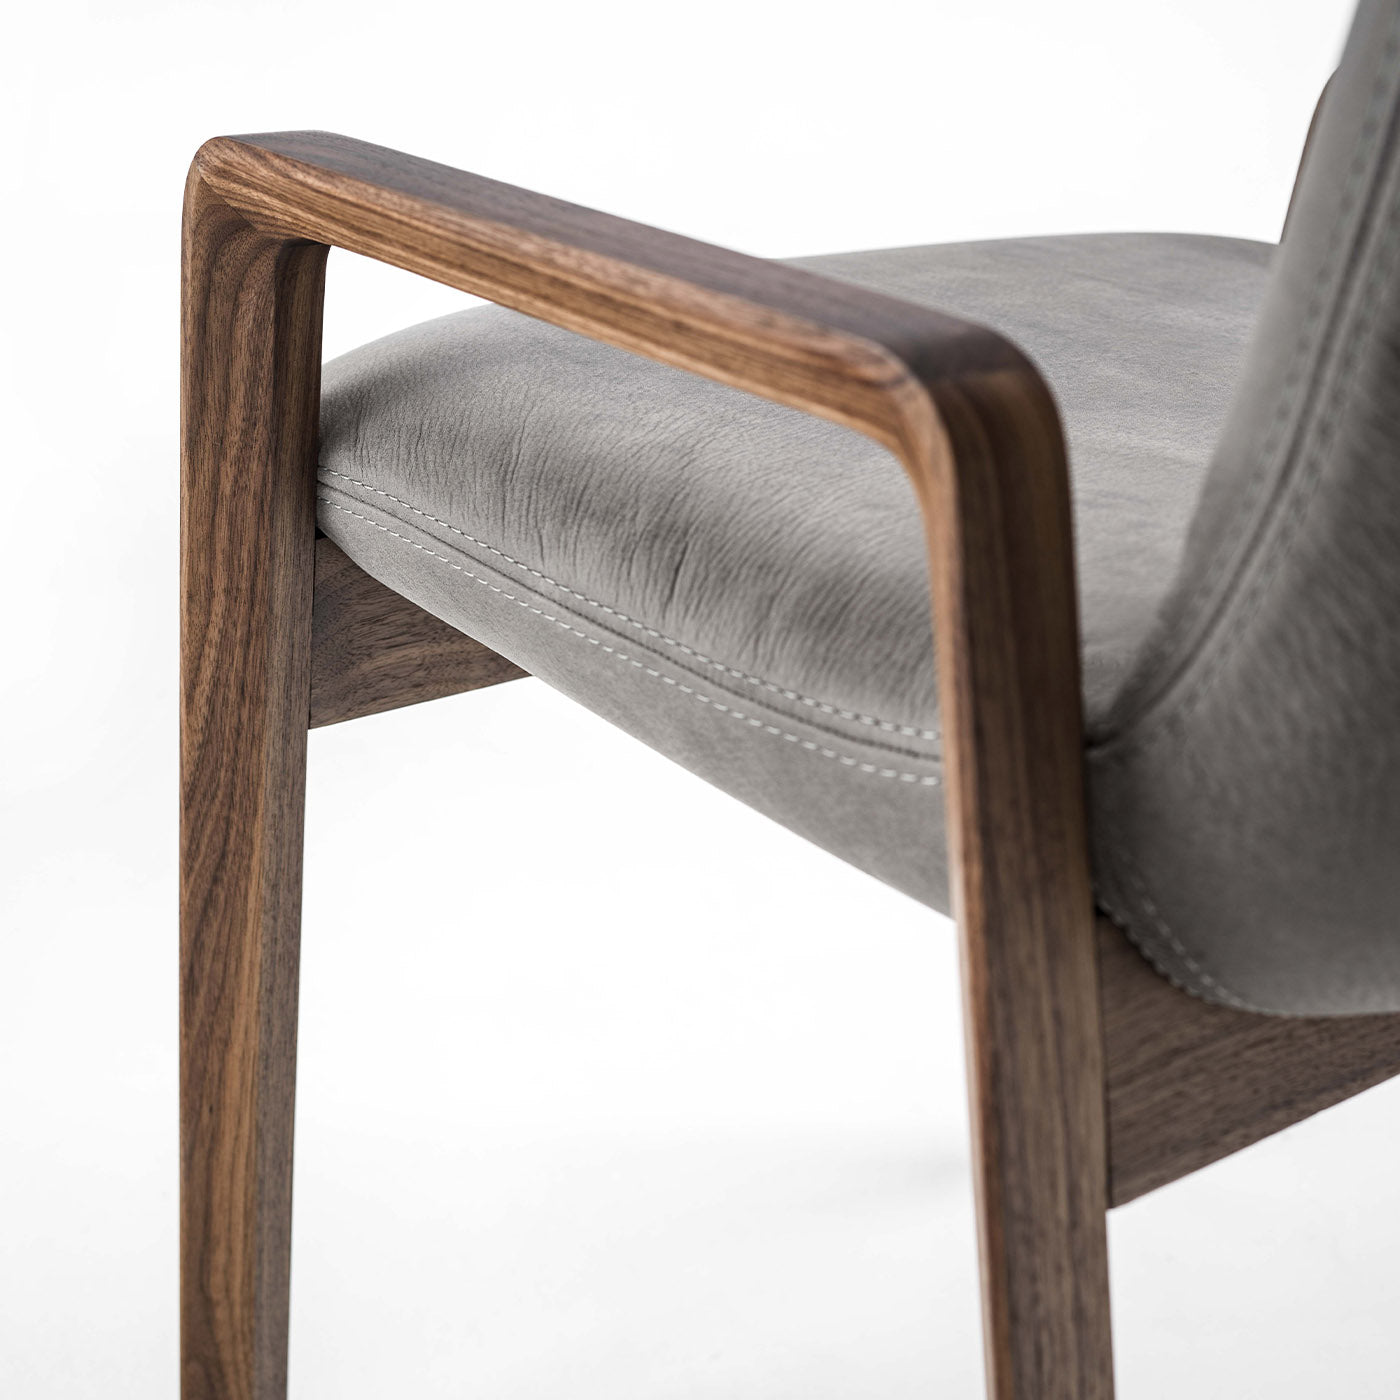 Noblé Gray Chair With Arms by Giuliano & Gabriele Cappelletti - Alternative view 2